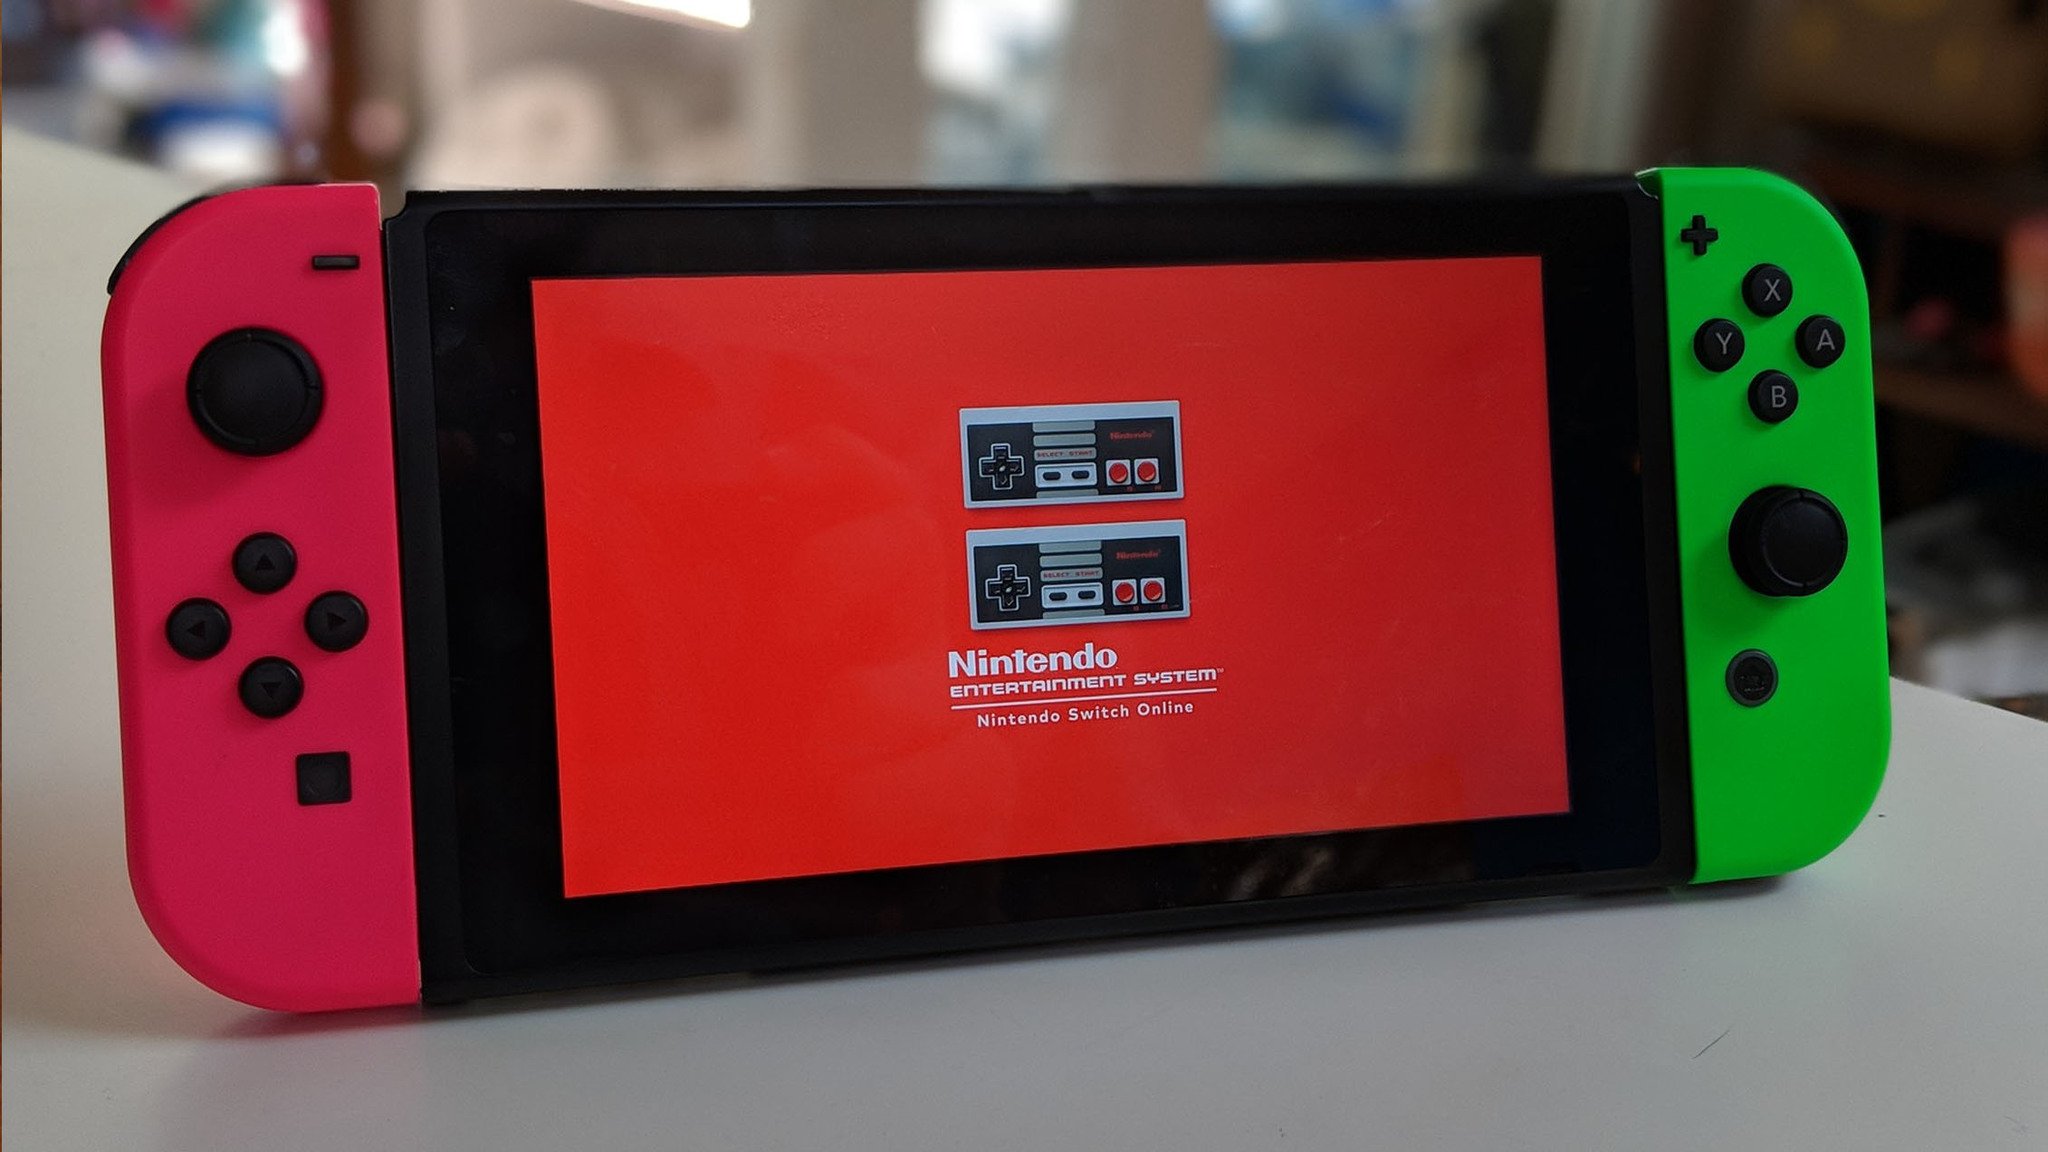 How to Install a Micro SD Card in Your Nintendo Switch - Switch Basics 